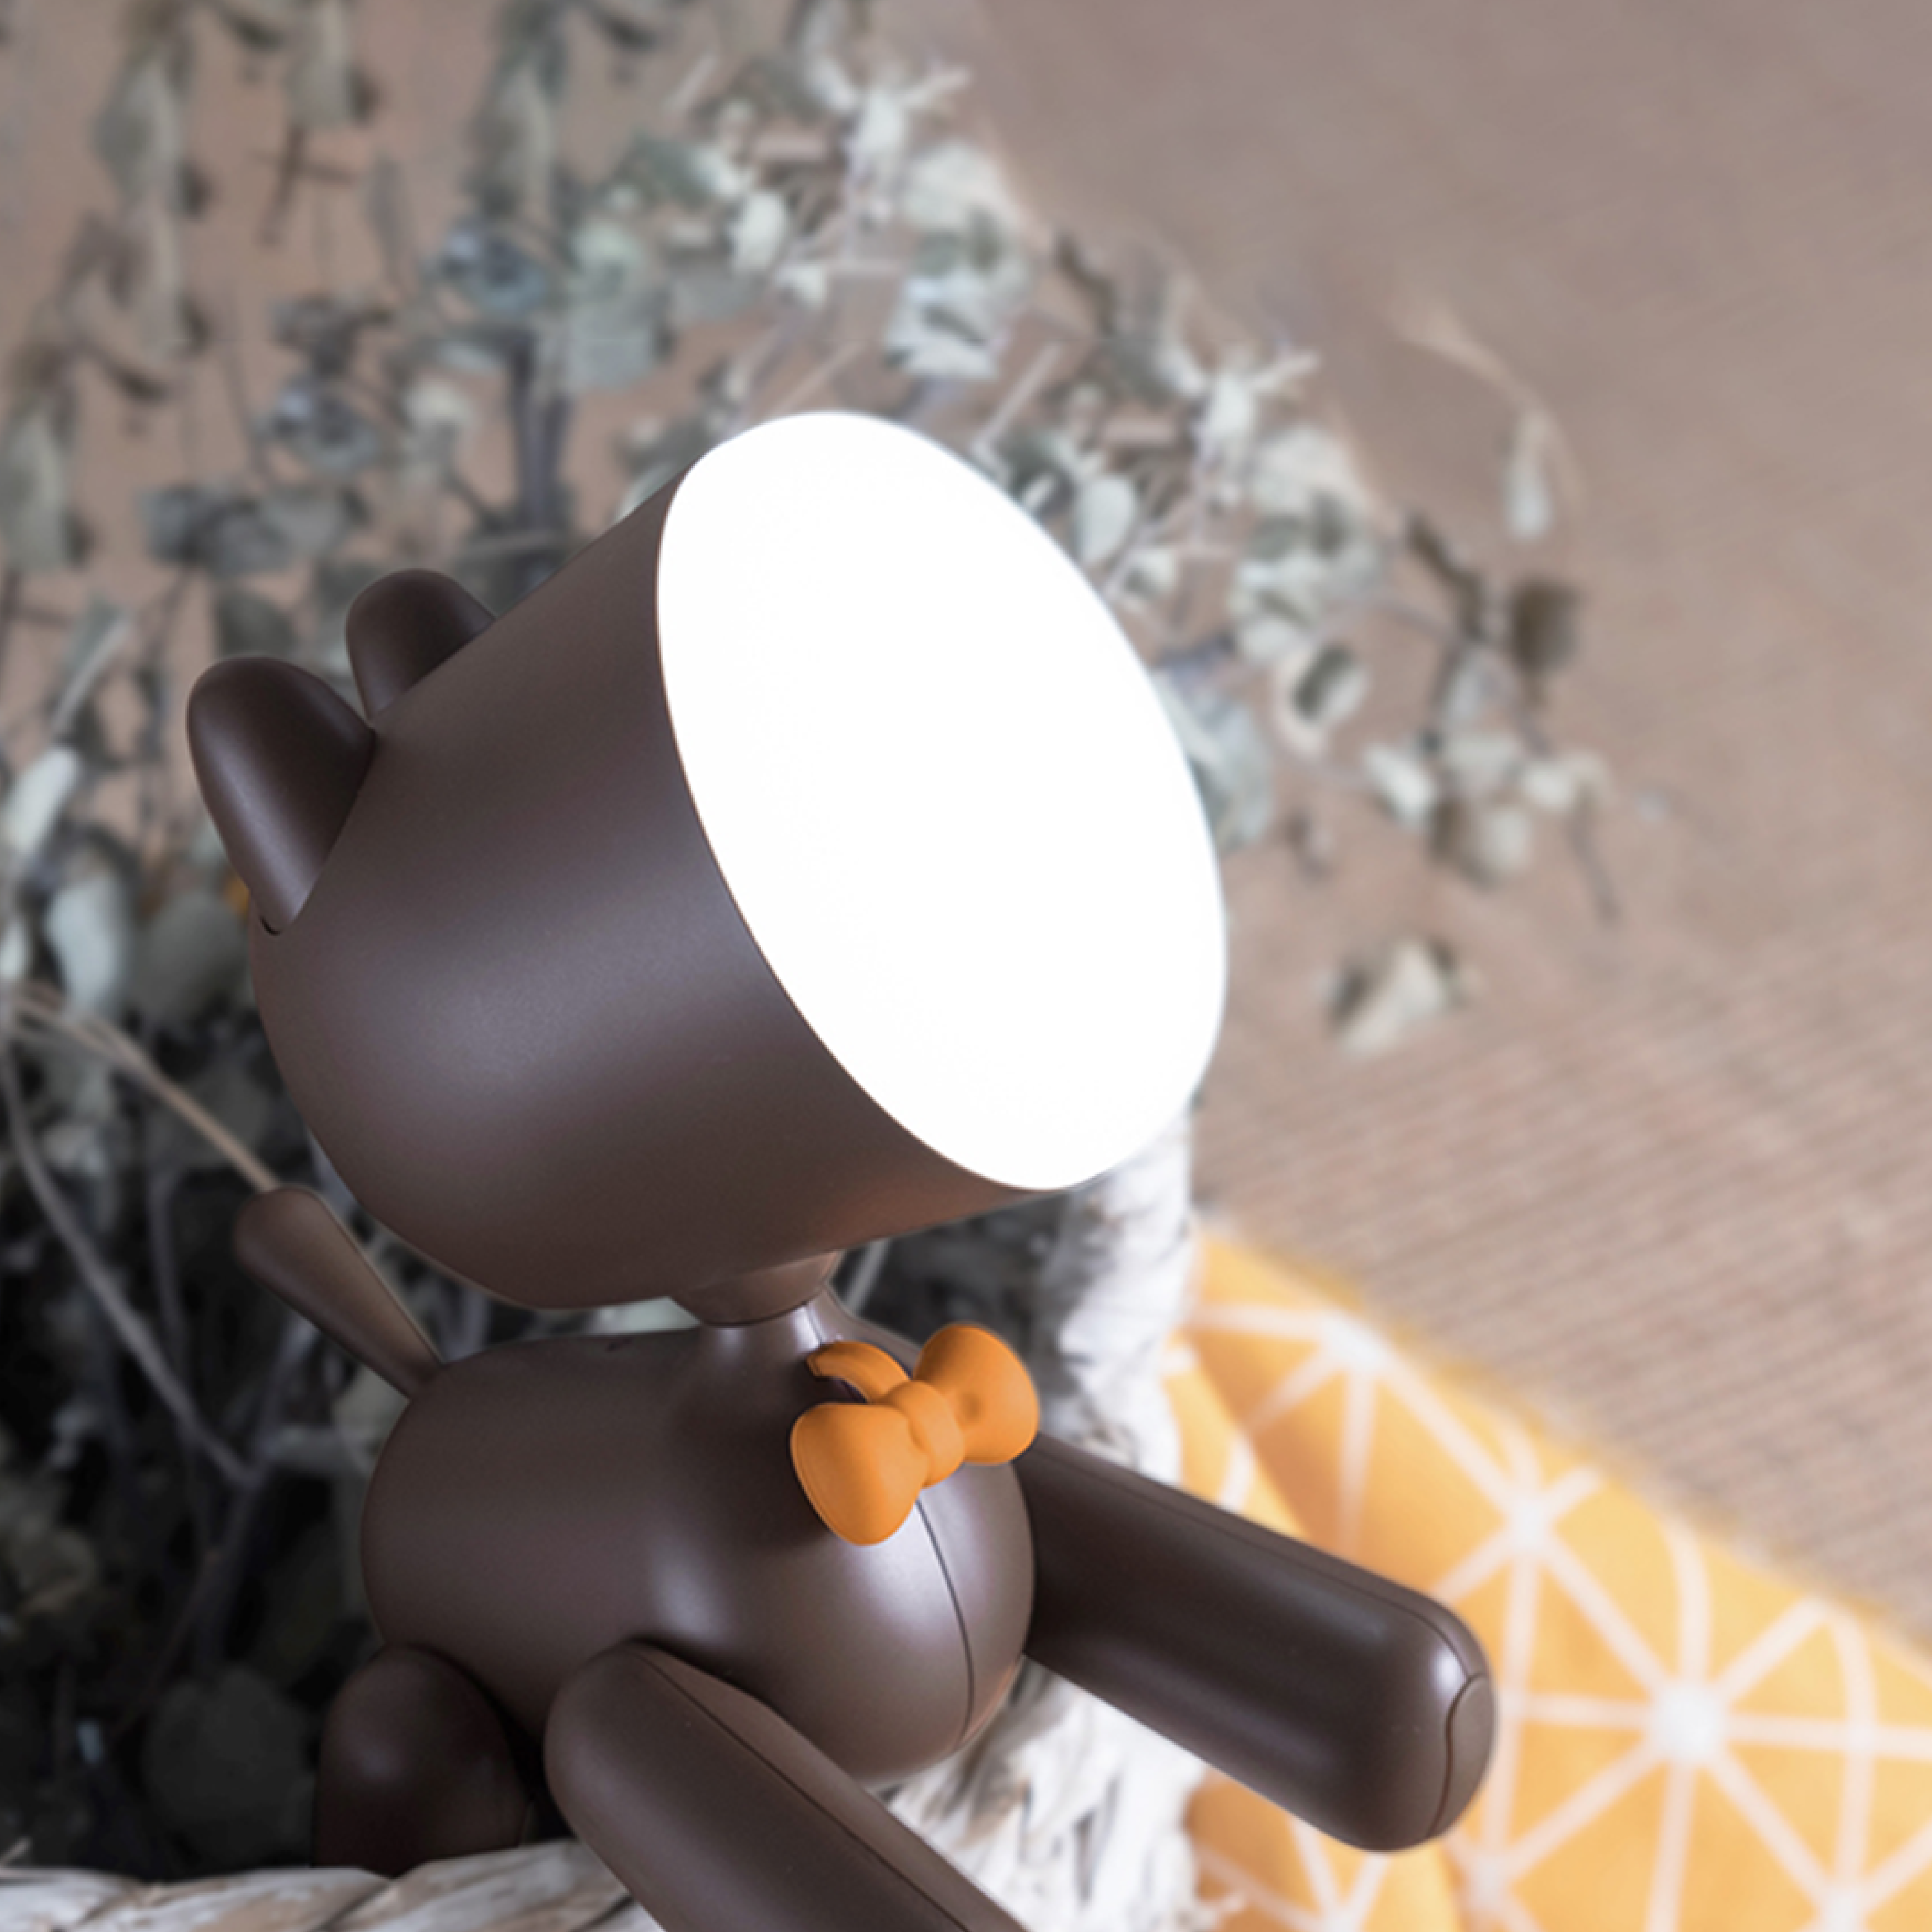 TailWag: Cute Puppy Table Lamp